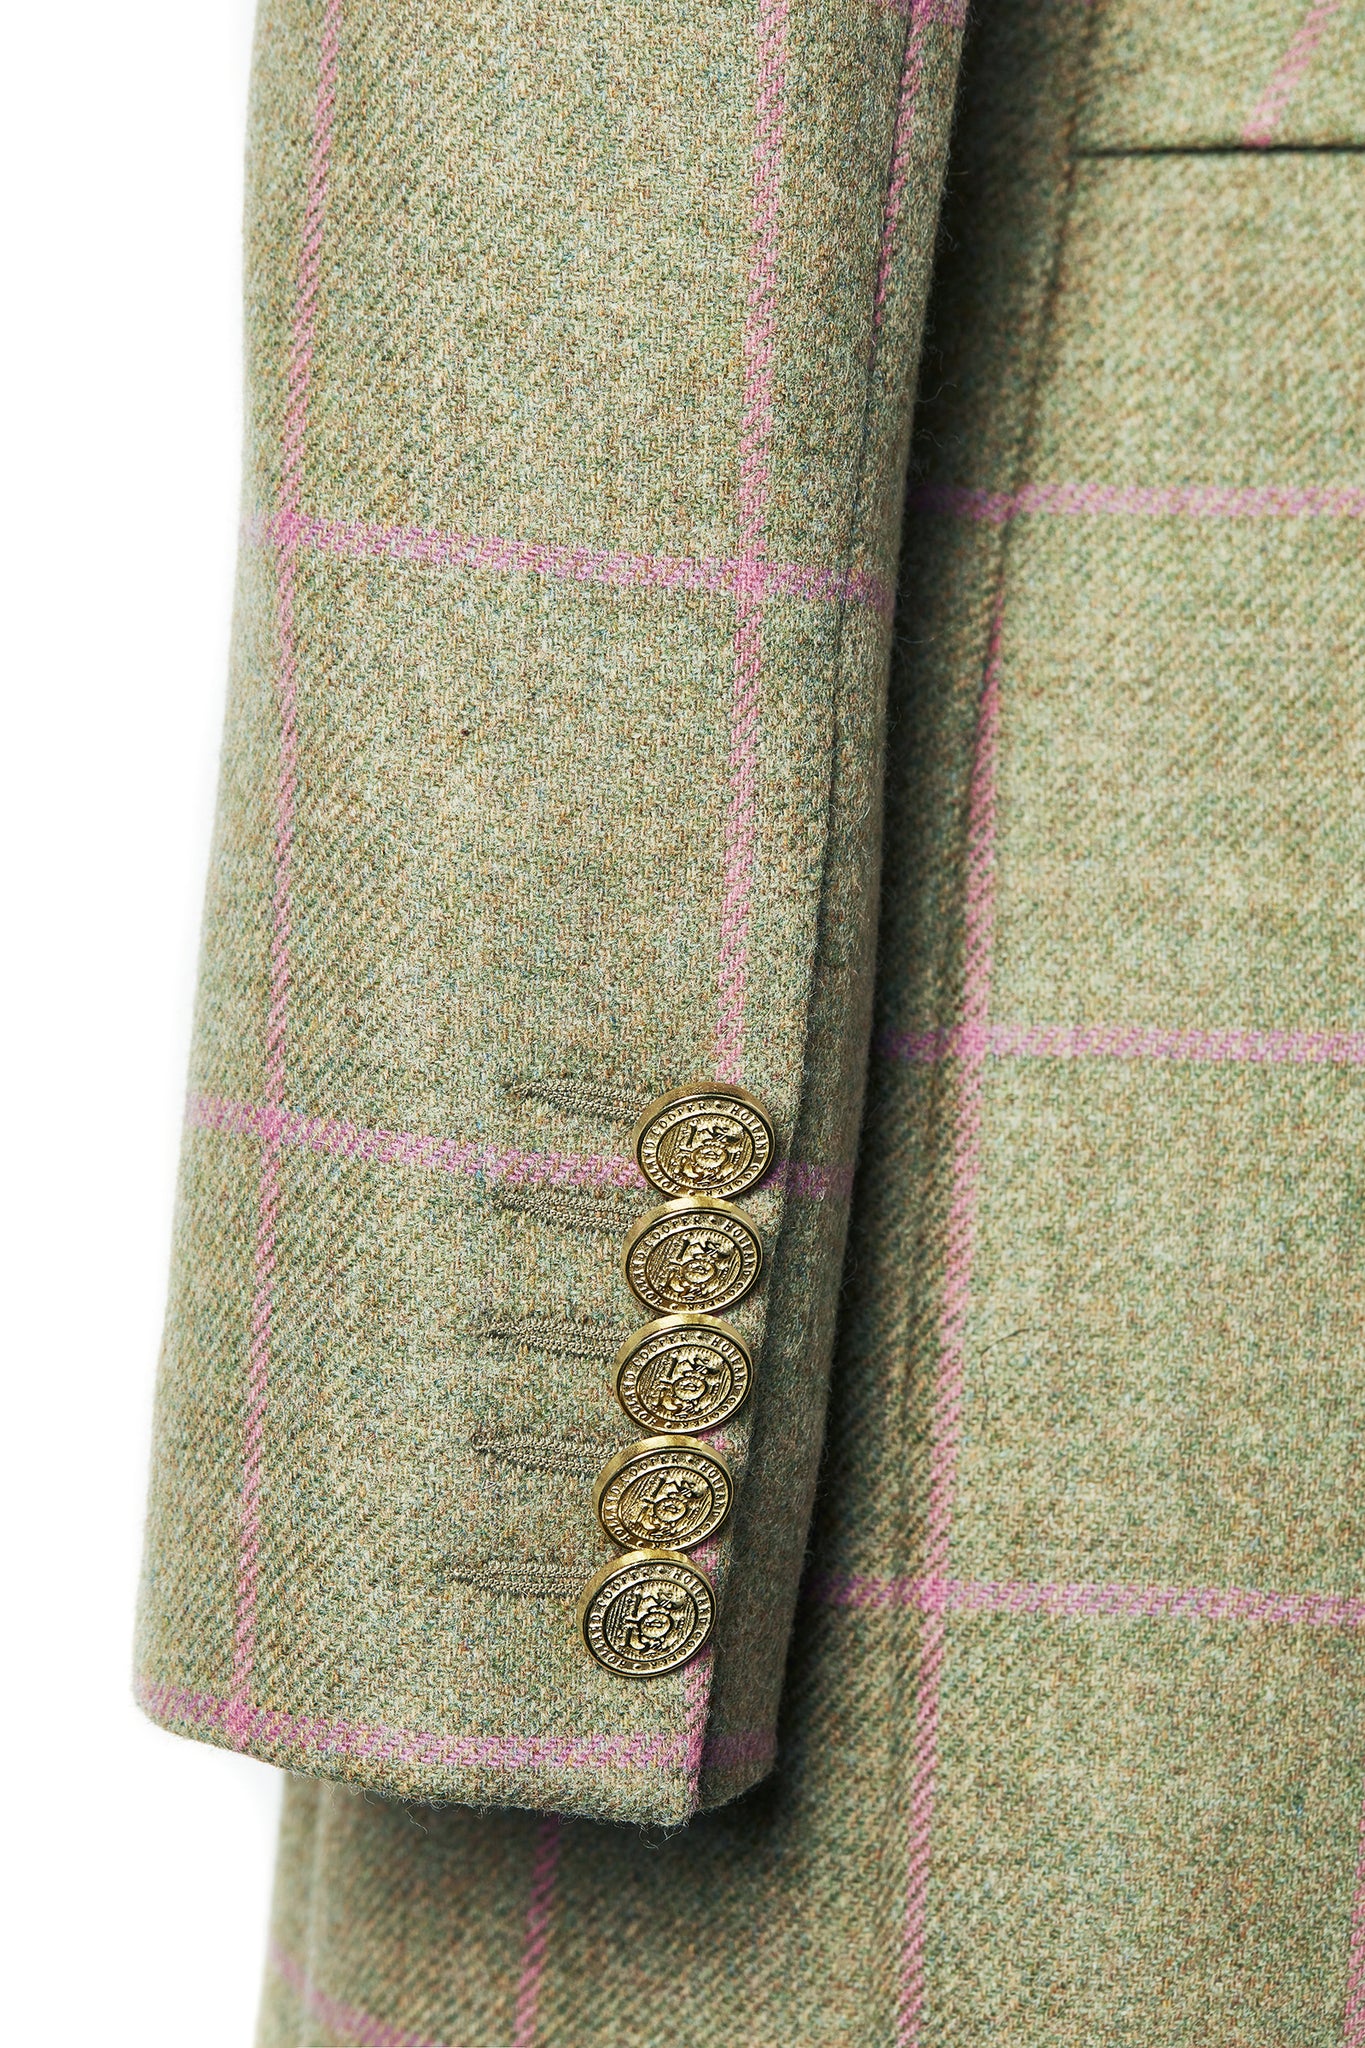 gold button sleeve detail on womens green and pink check single breasted full length wool coat